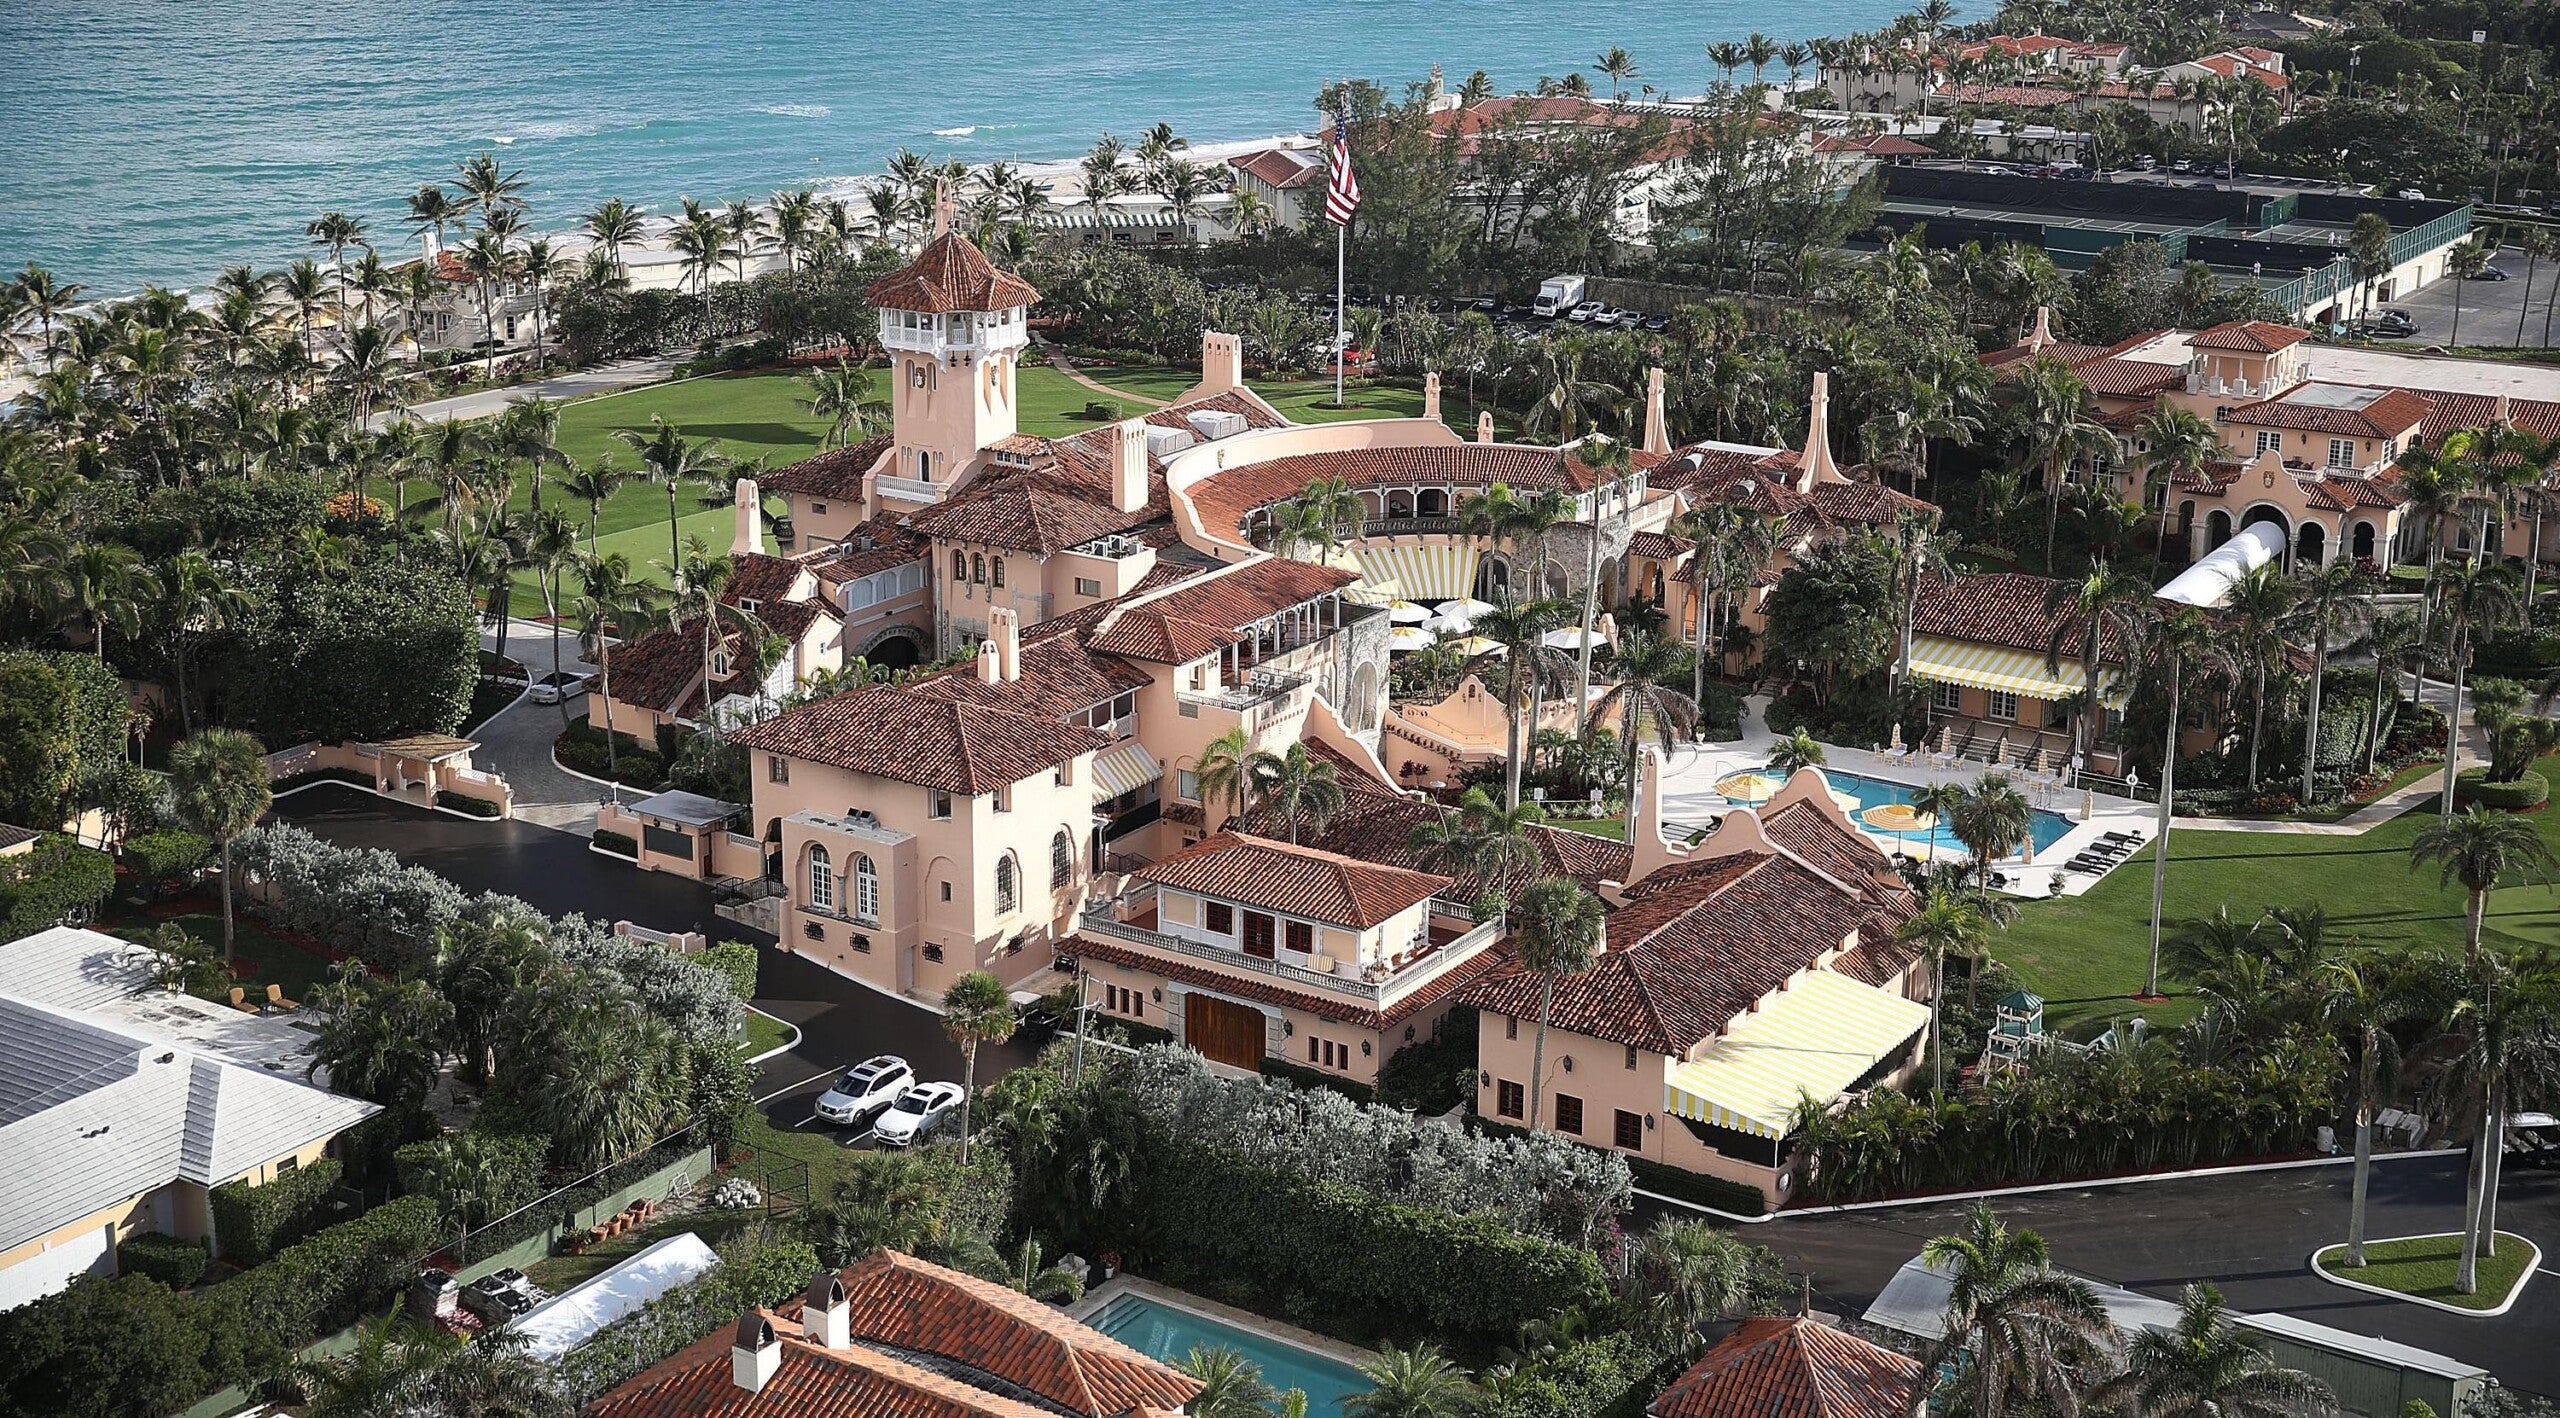 Mar-a-Lago renovations overseen by Melania anger Trump, sources say ...